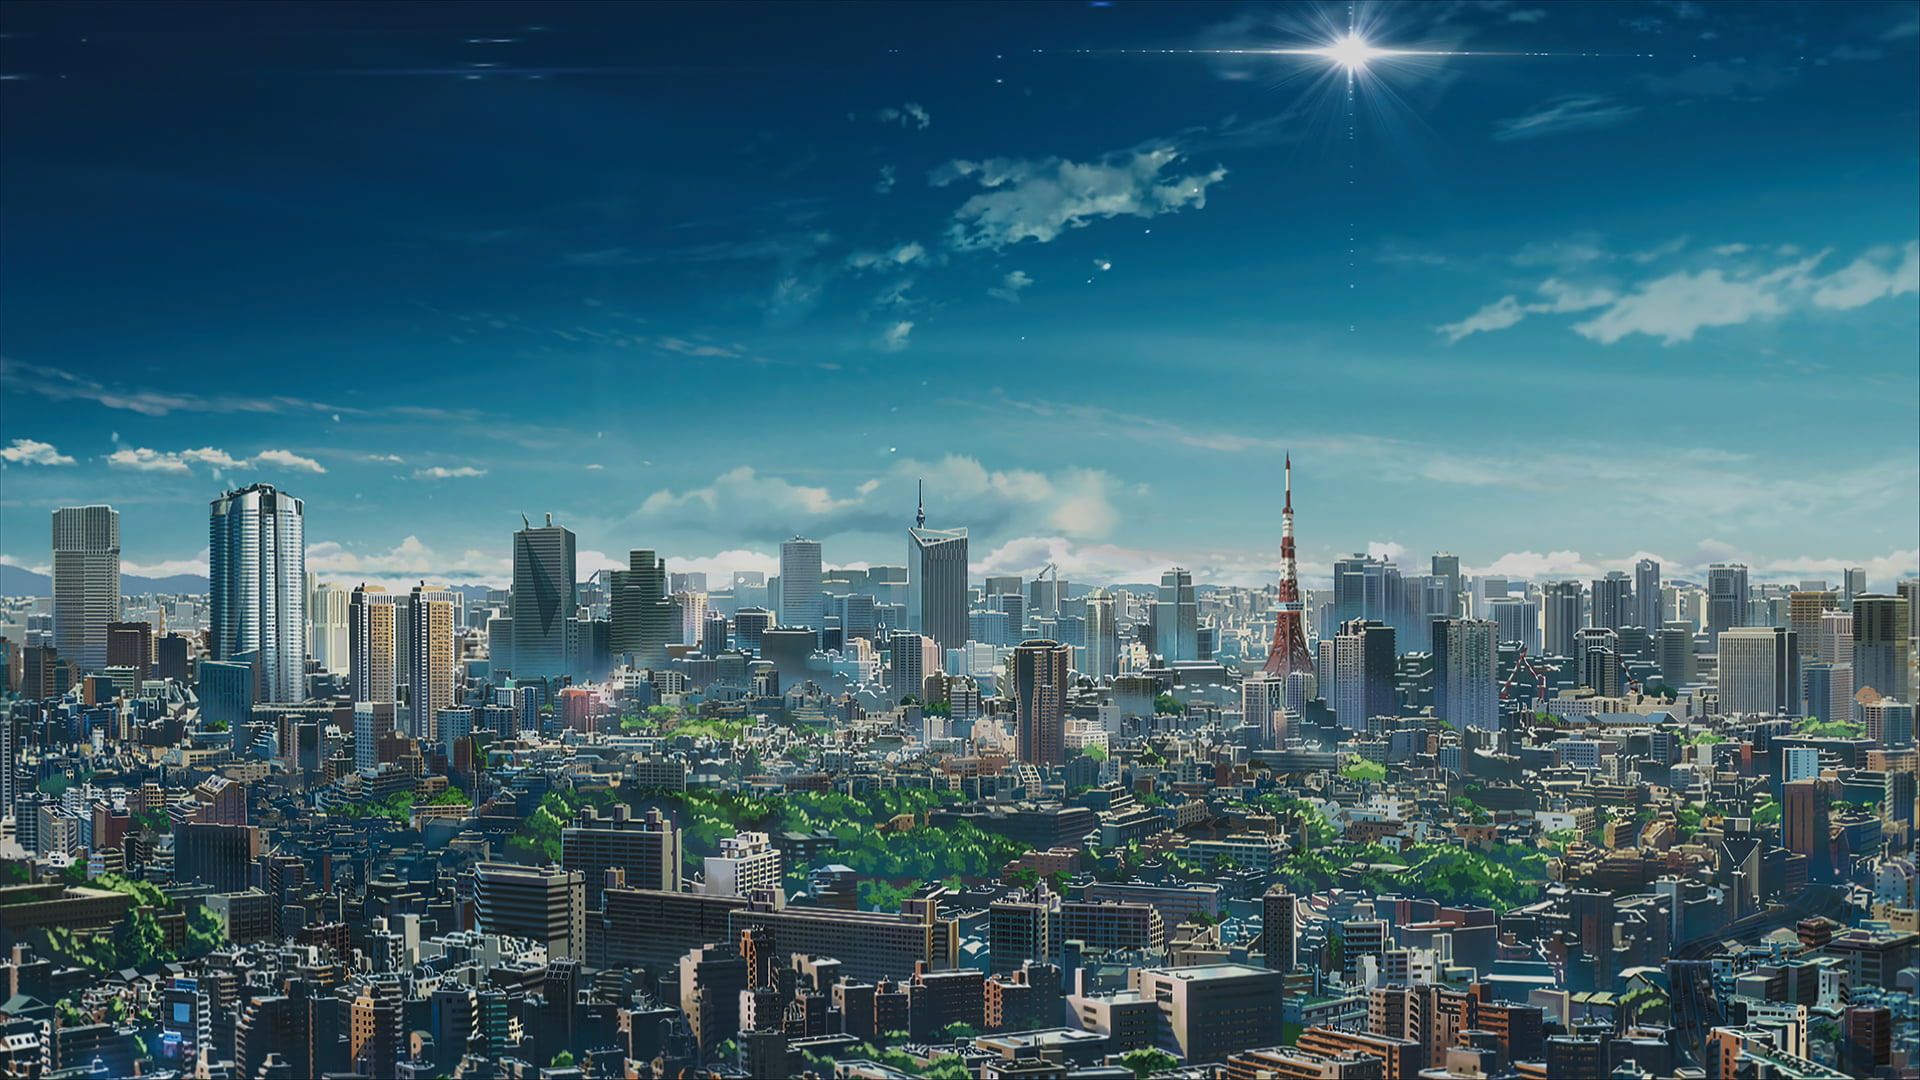 A city with many tall buildings and trees - Anime city